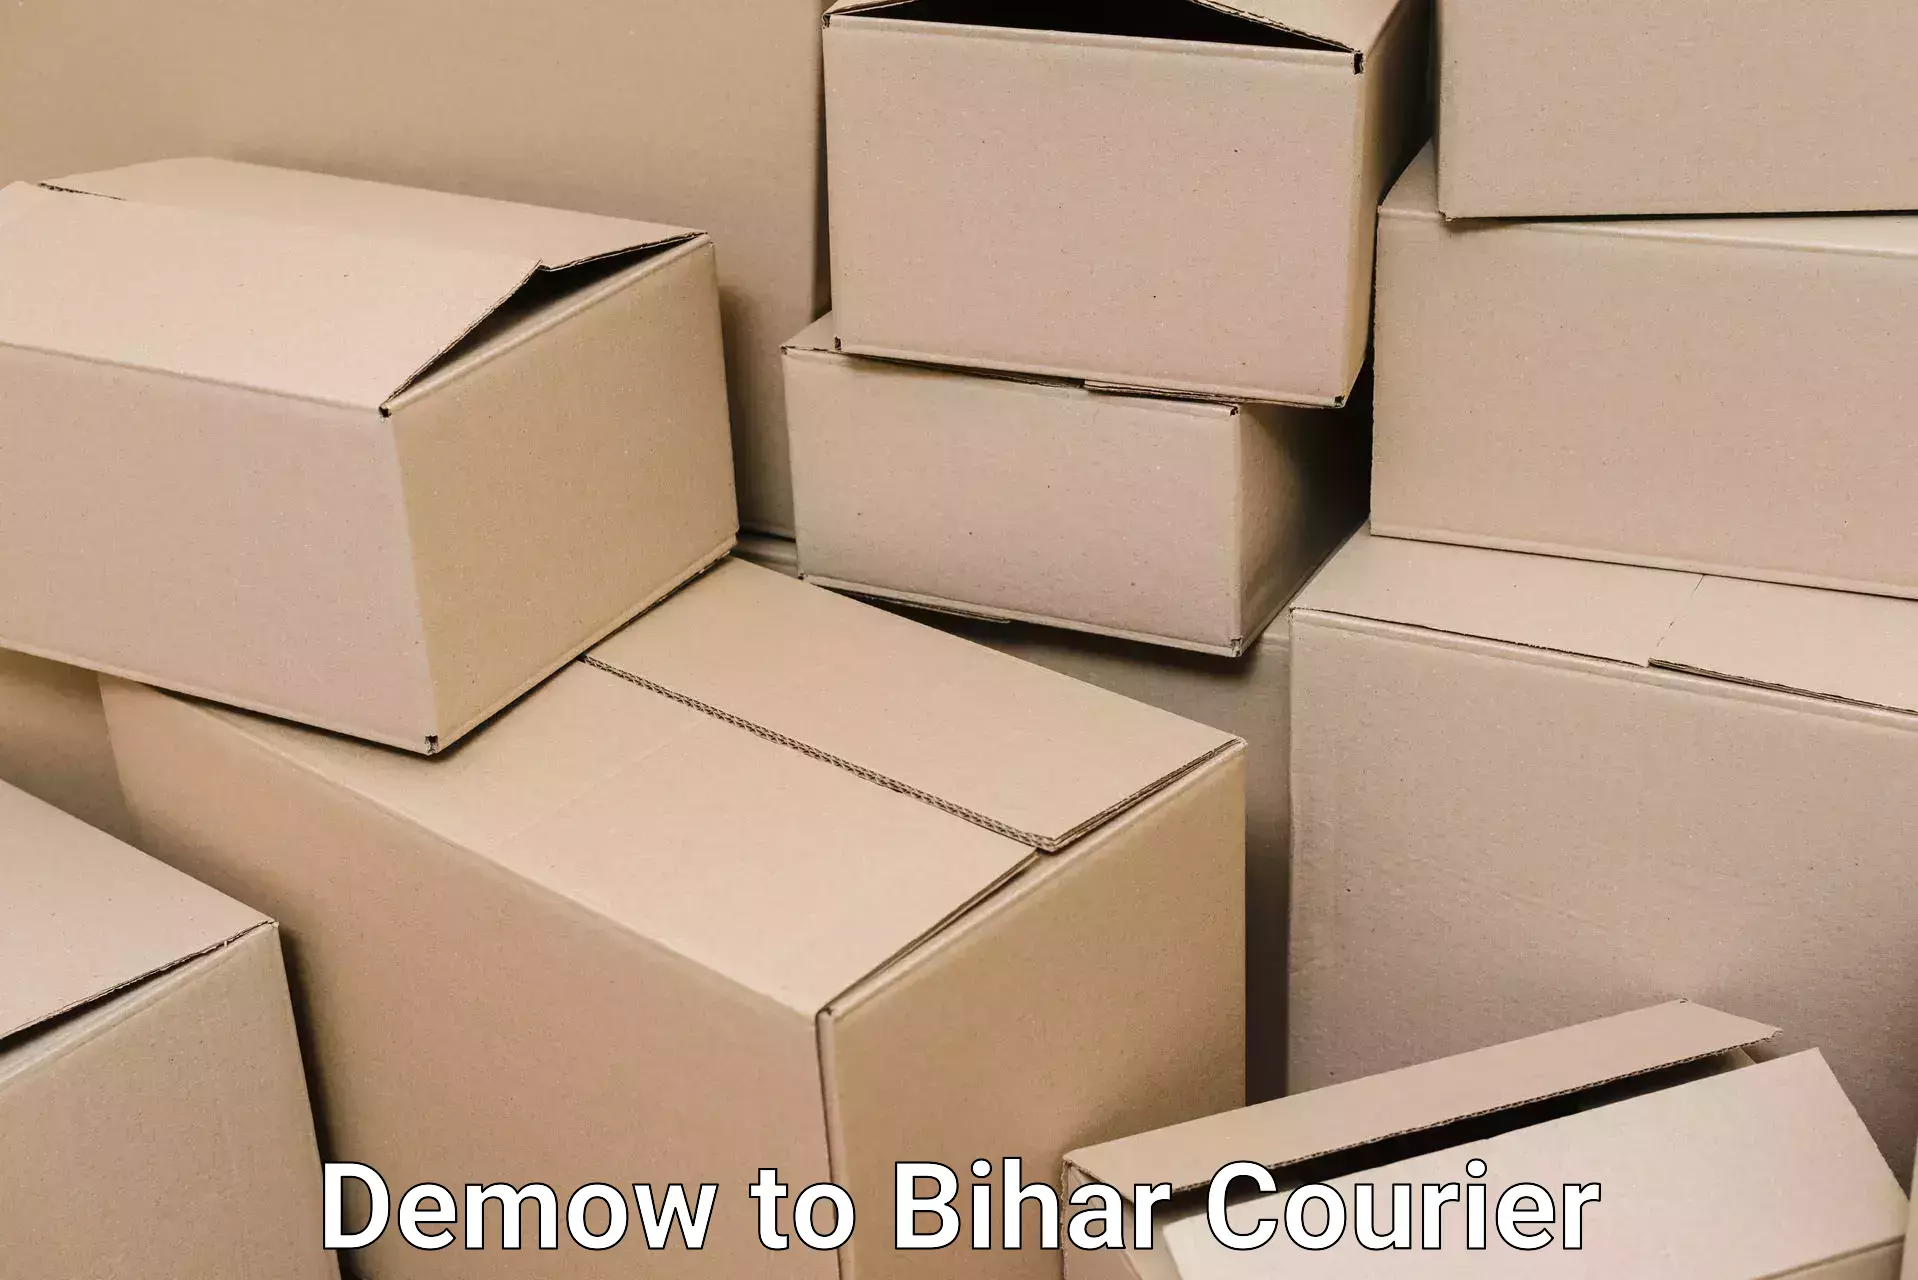 Household transport experts Demow to Bihar